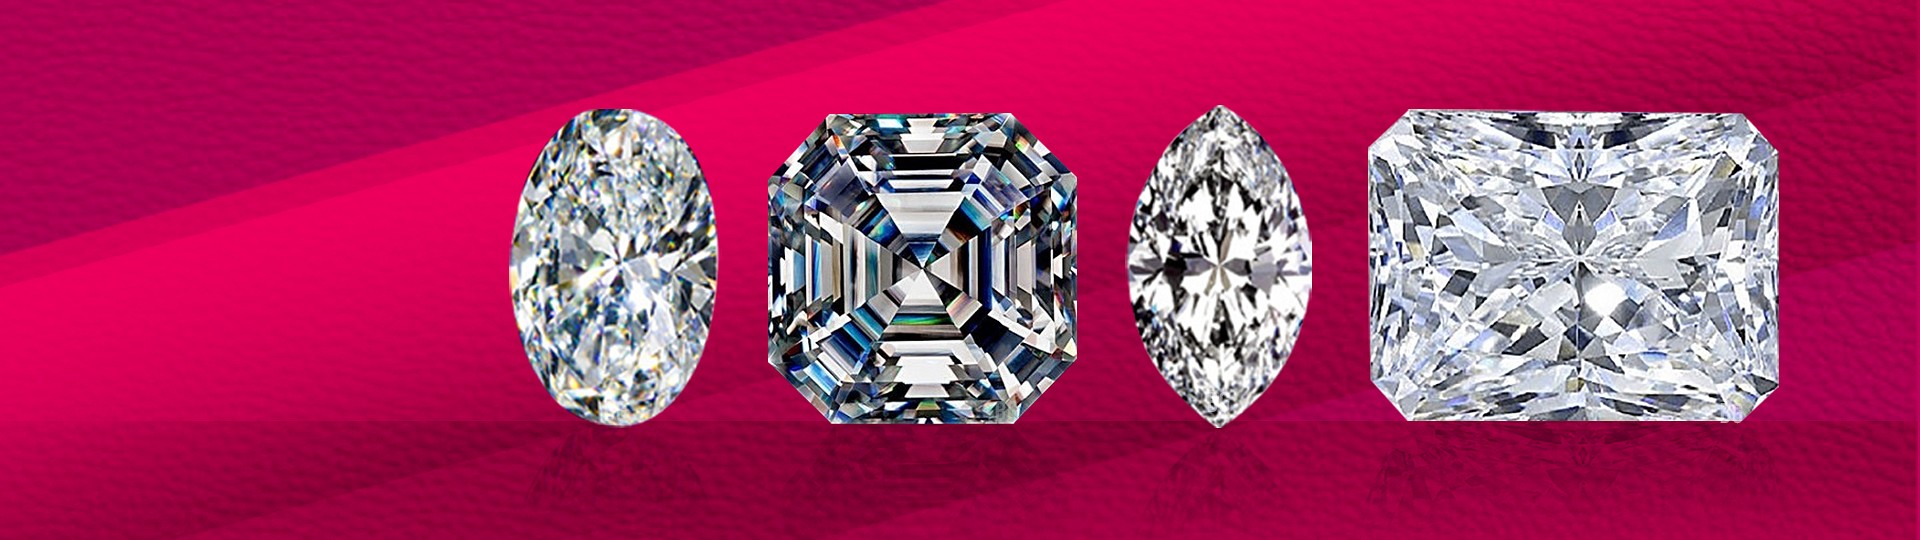 Top Of The Line- GIA Graded Investment Diamonds by Bid Global International Auctioneers LLC